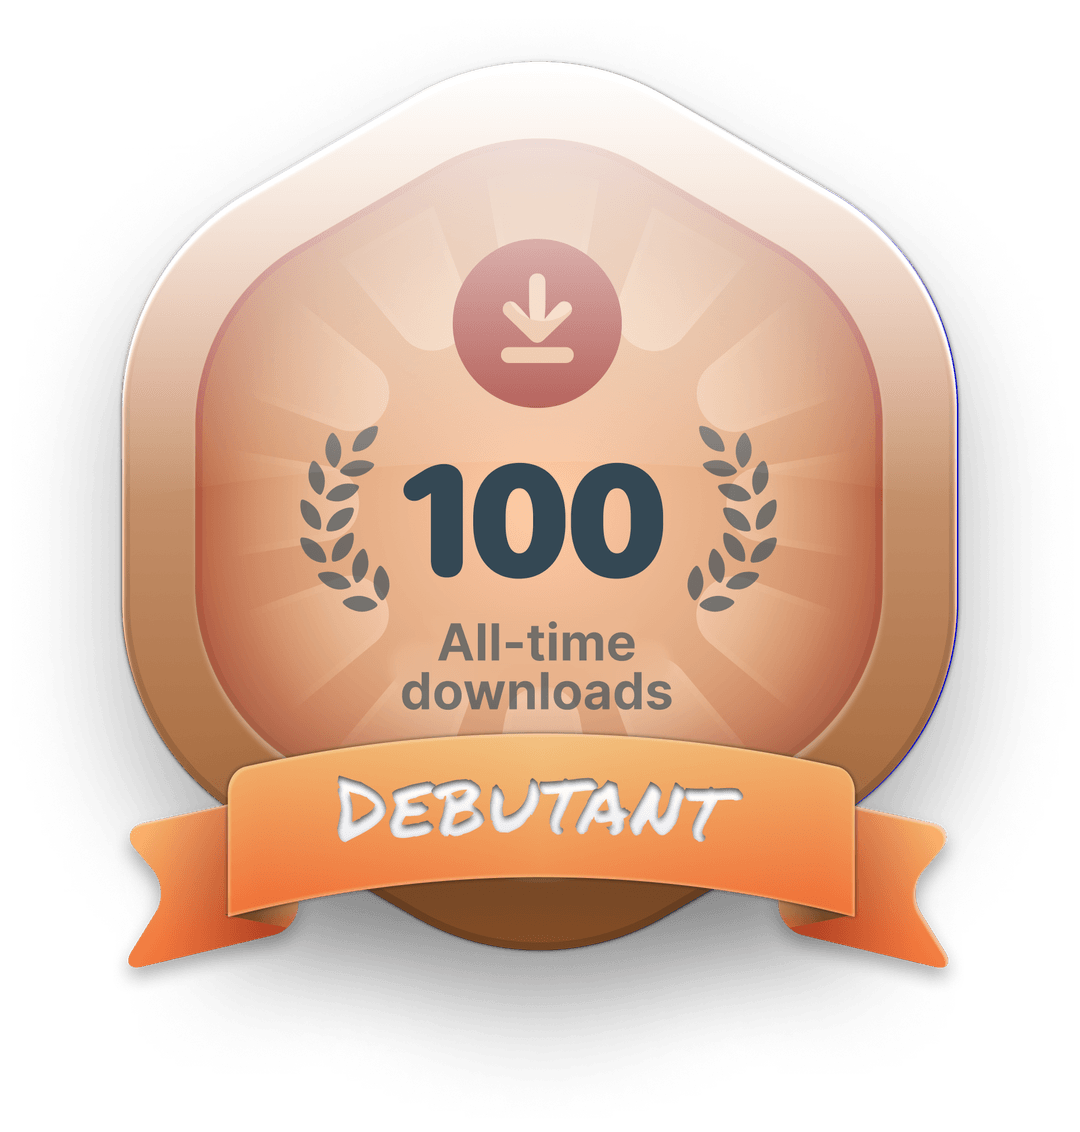 100 All-time downloads